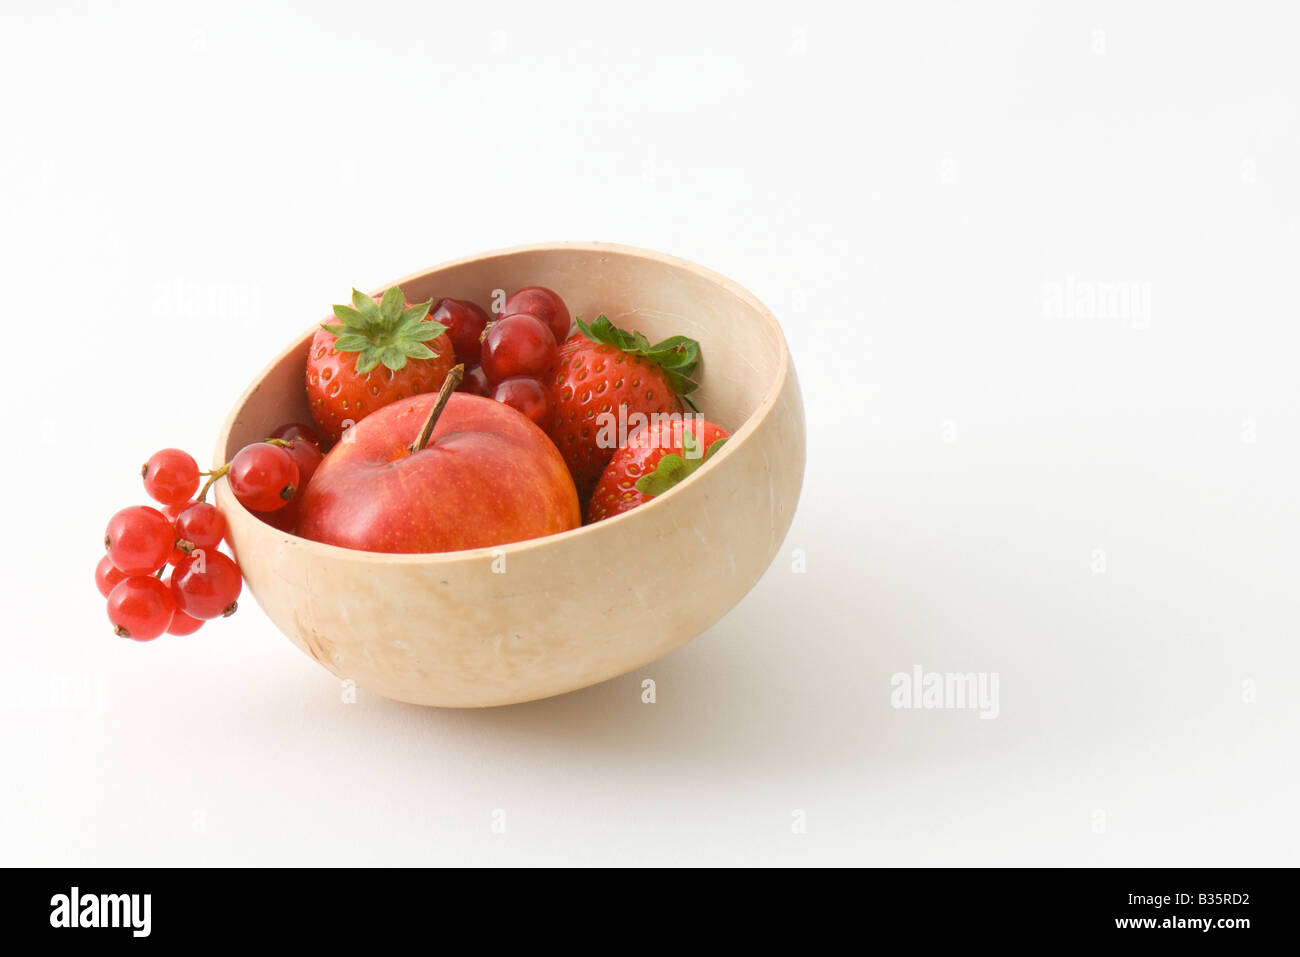 Variety of fruit in a wooden bowl Stock Photo